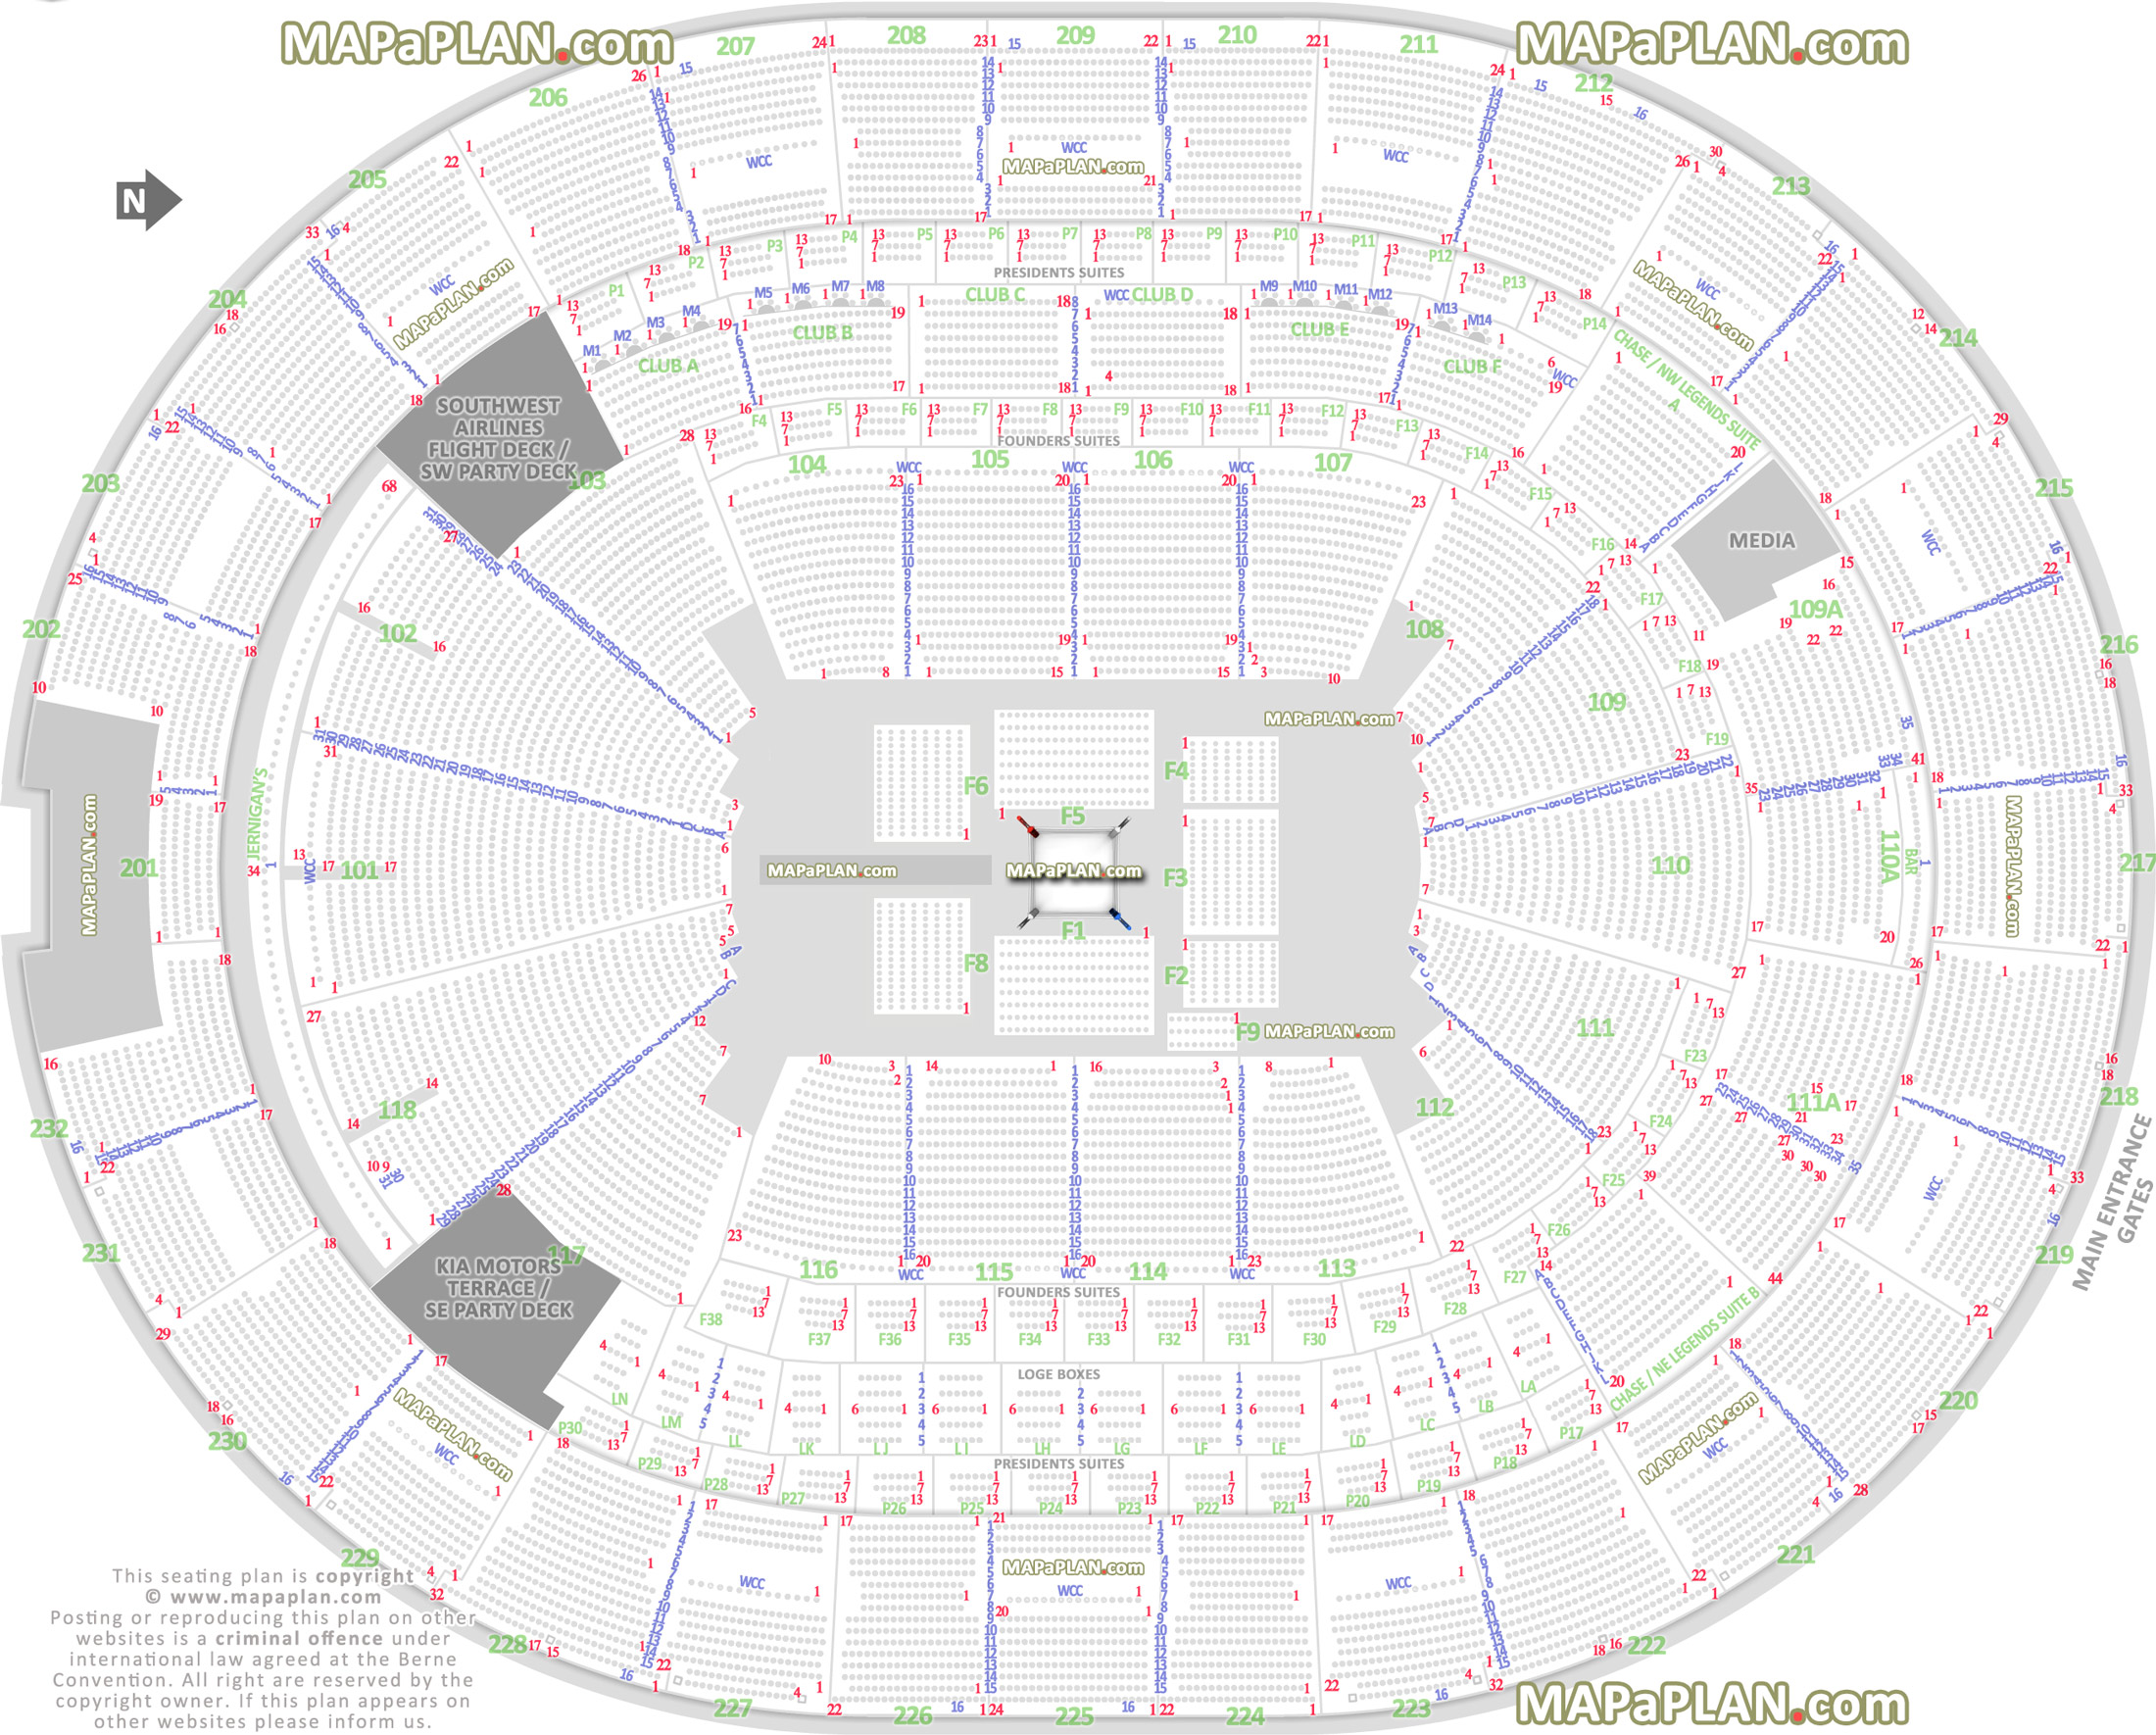 wwe raw smackdown live wrestling boxing match events 360 ring configuration row numbers good bad seats media press Orlando Amway Center seating chart